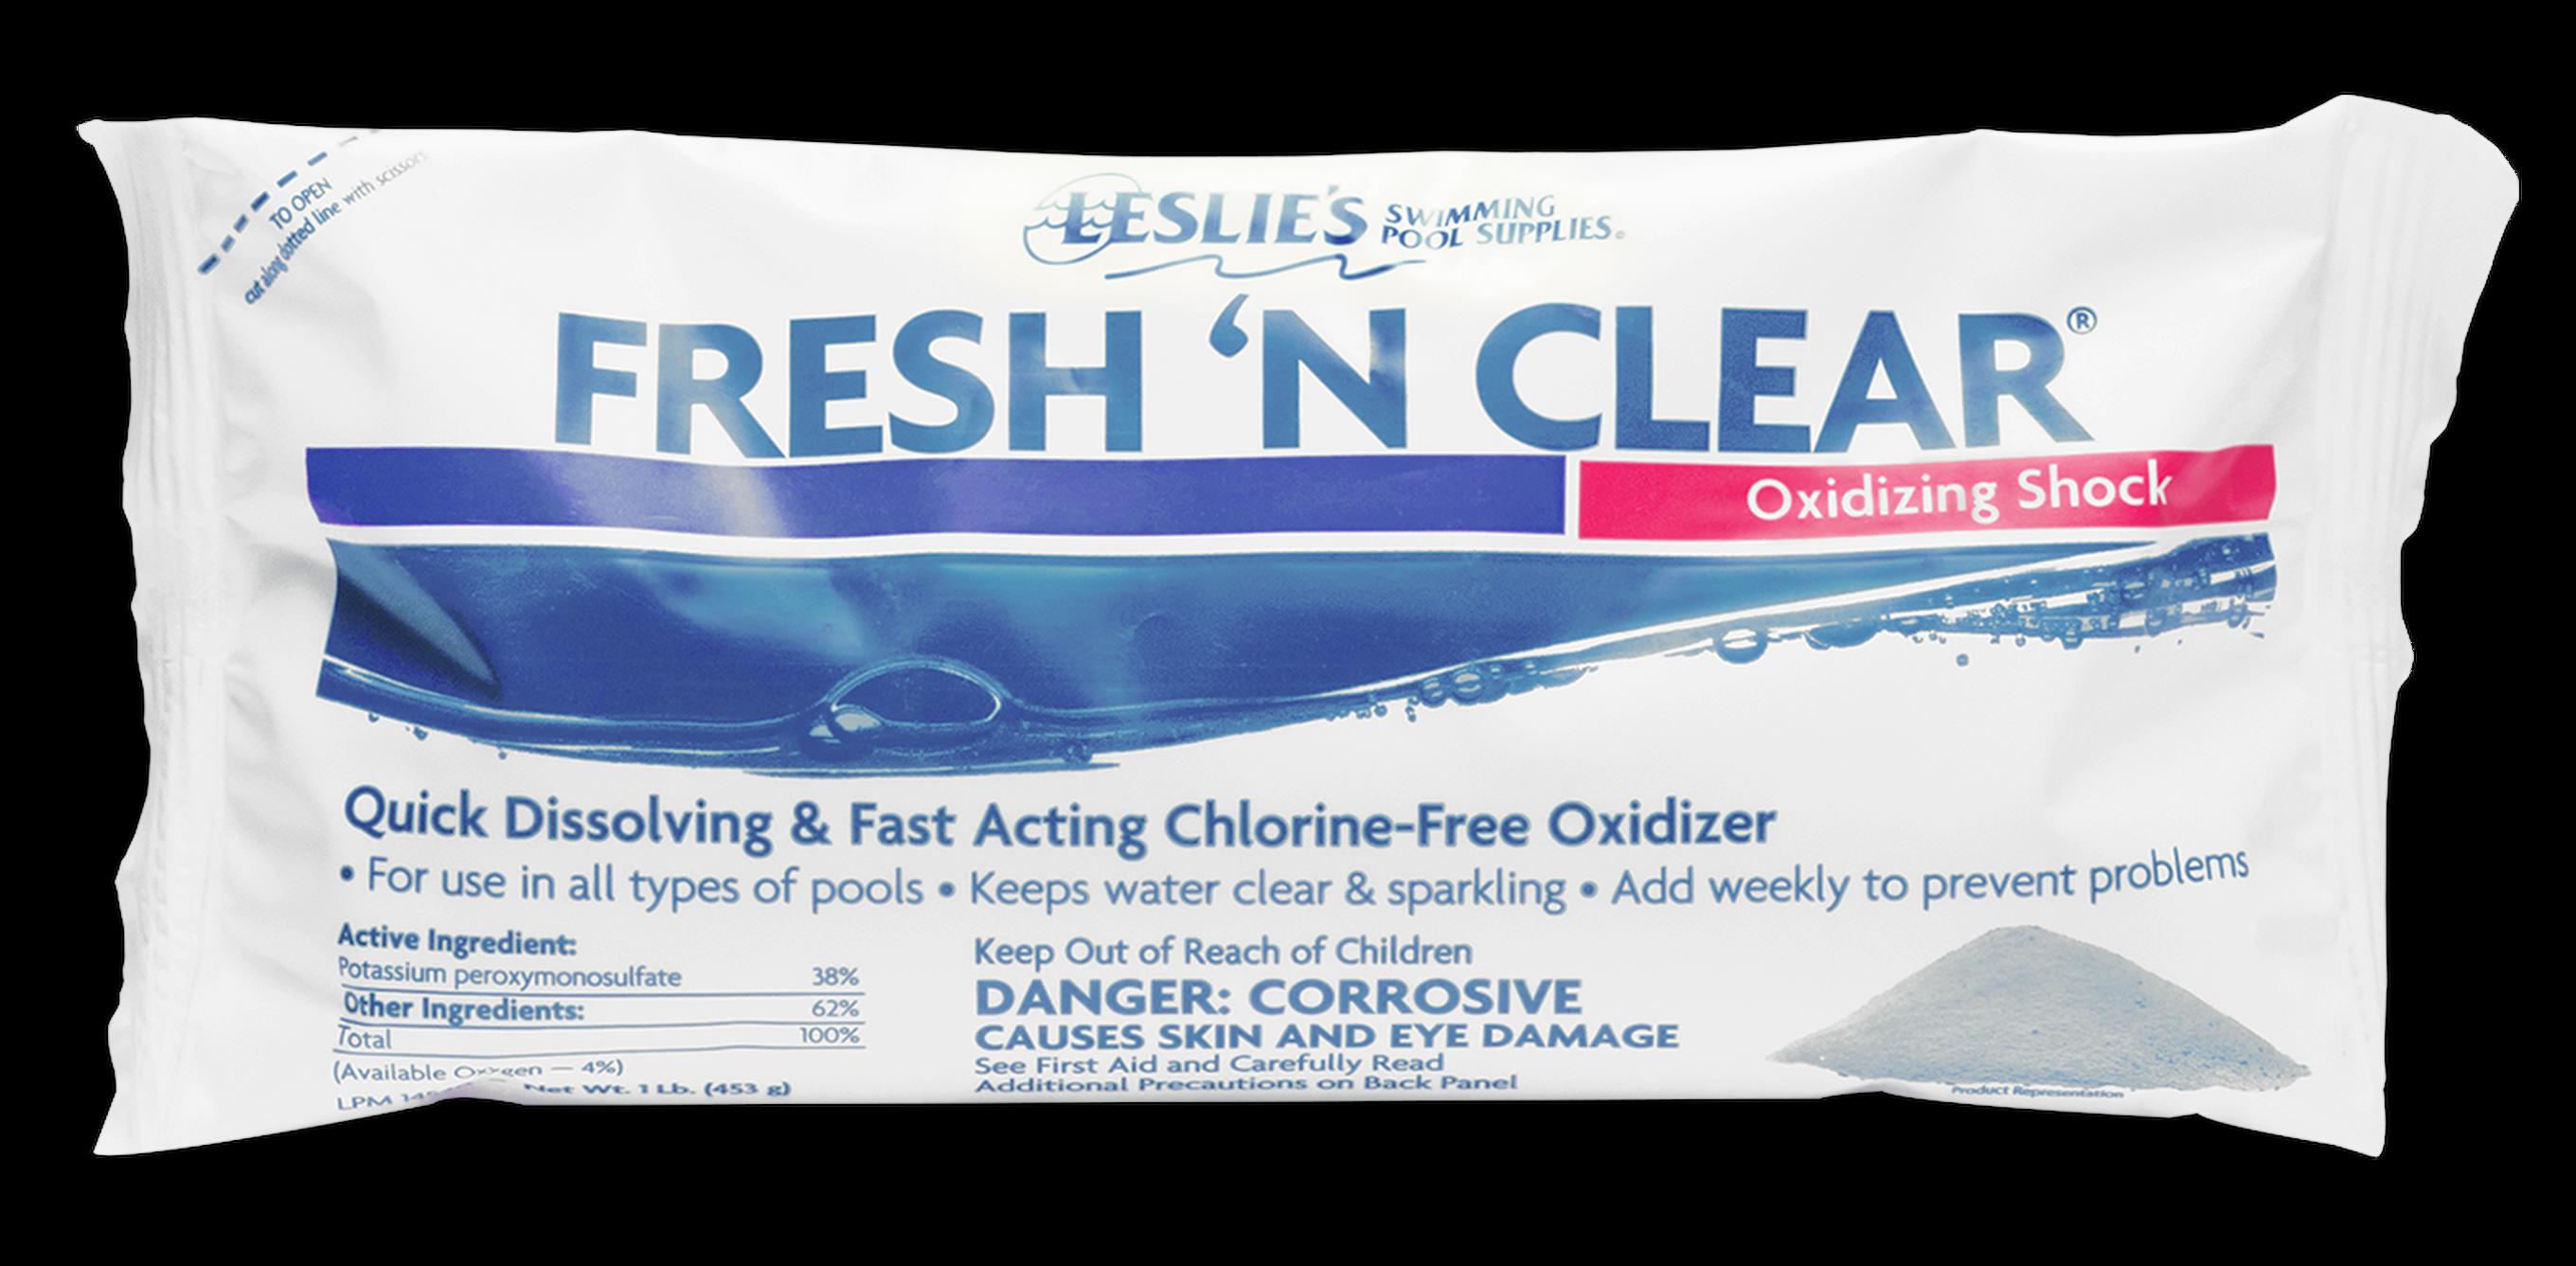 A picture of Fresh 'N Clear